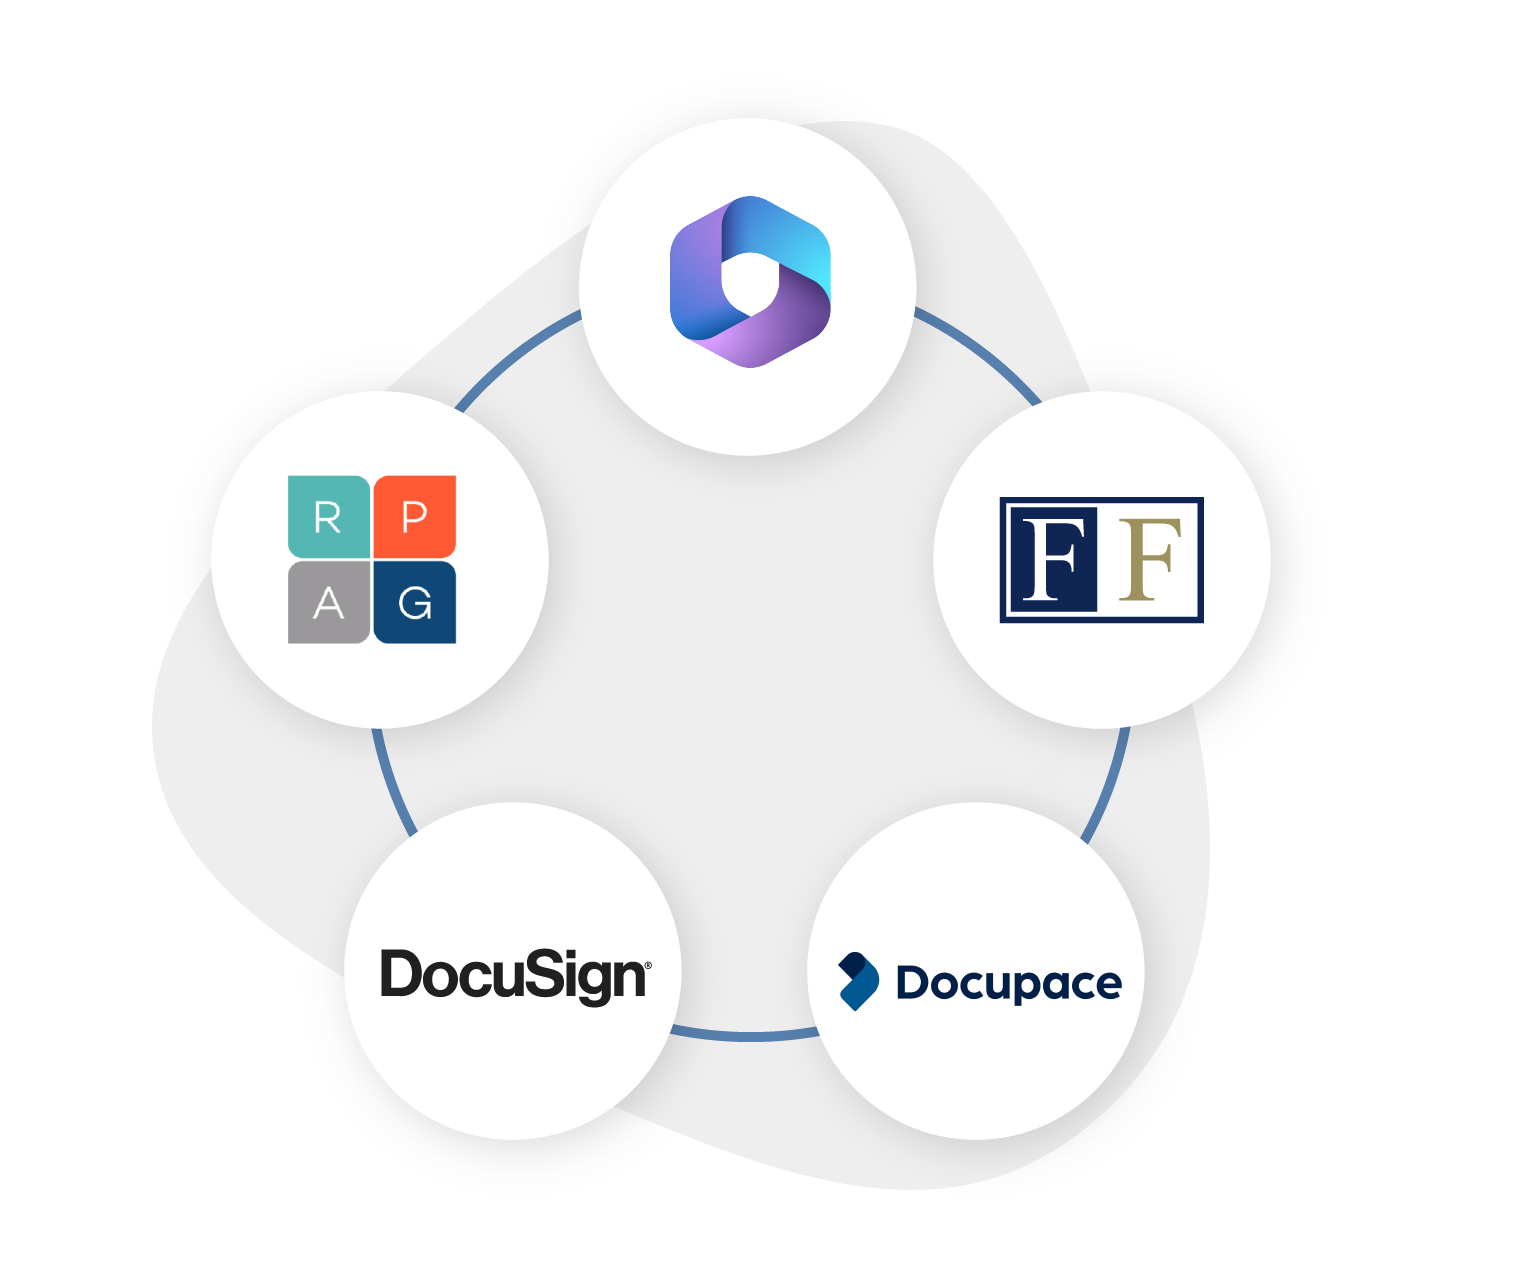 Holistic view of Founders Financial tech stack focused on practice management, including, Microsoft 365, Docupace, Founders Financial, RPAG, and DocuSign